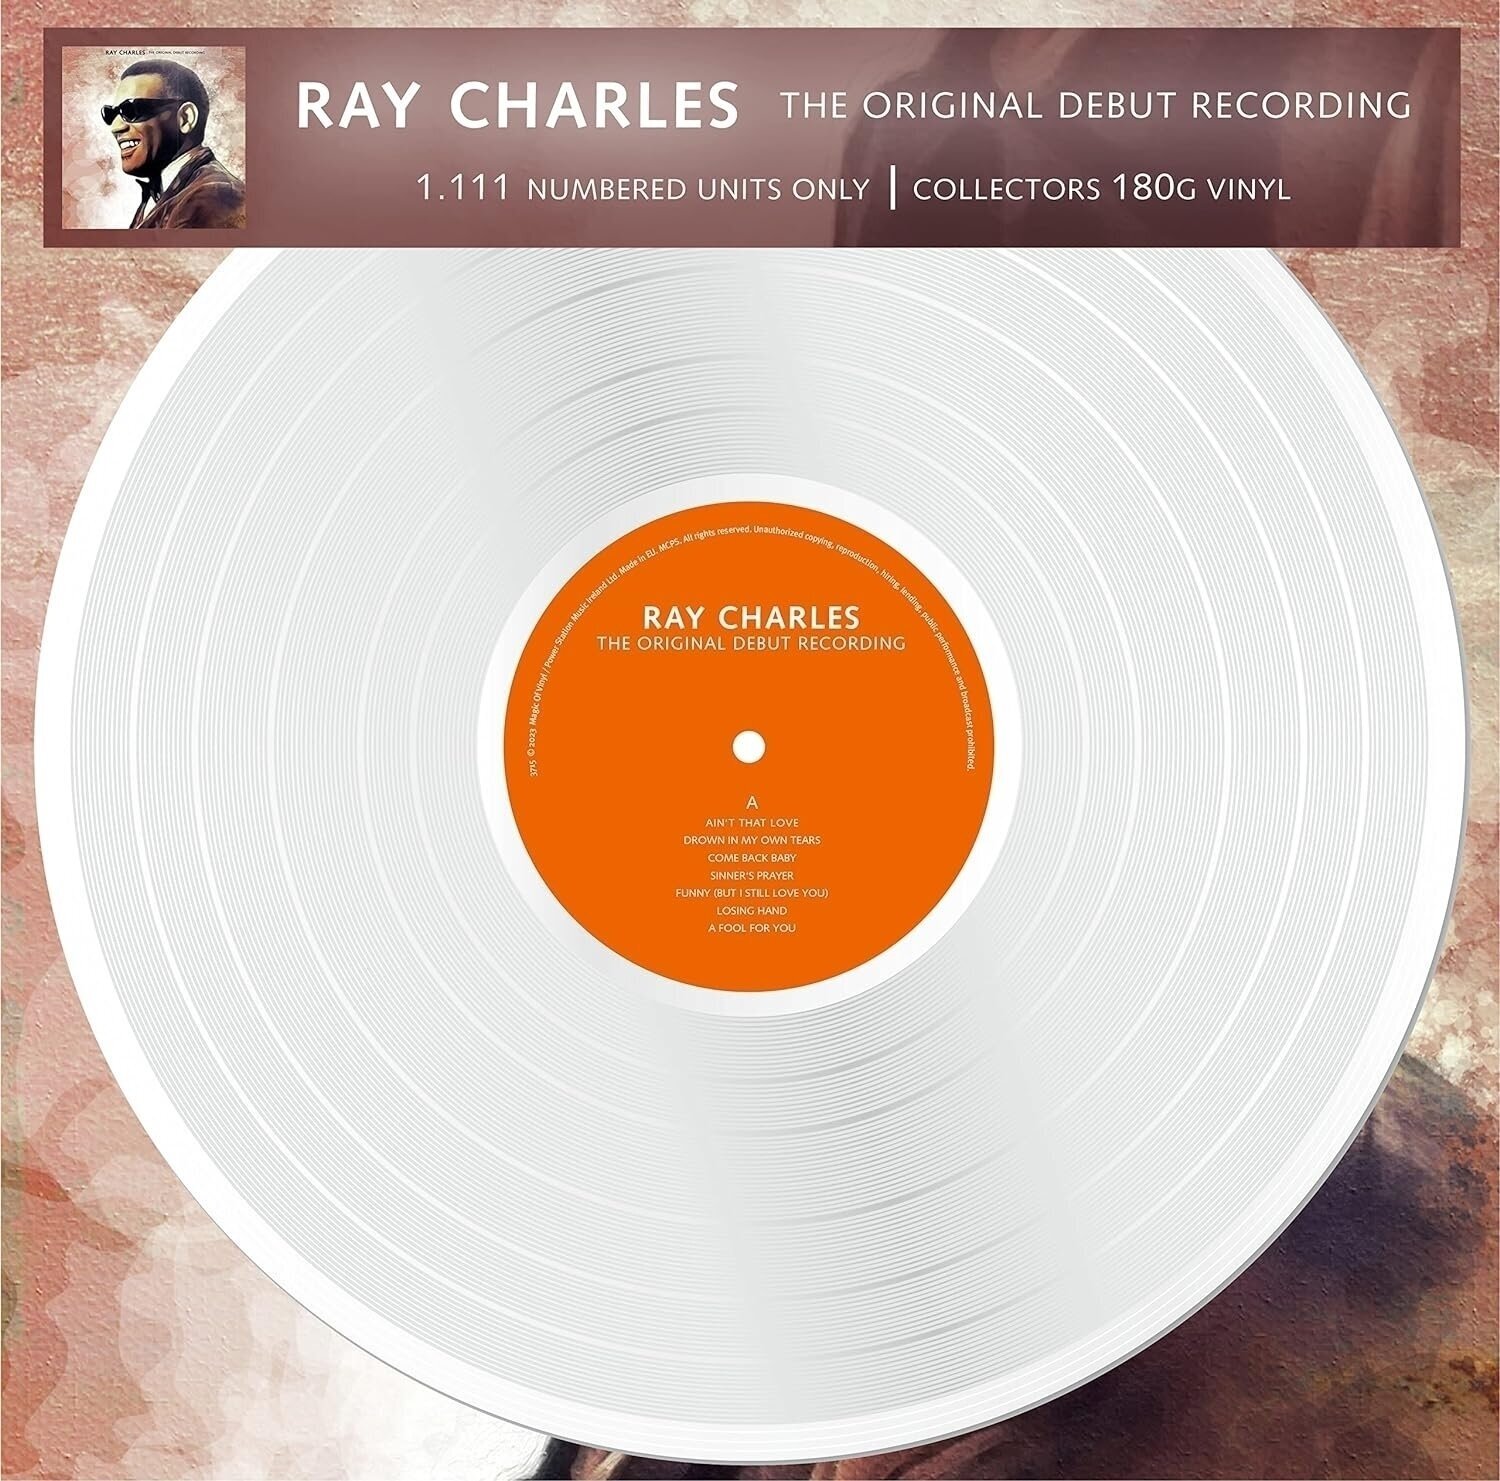 LP Ray Charles - The Original Debut Recording (Limited Edition) (Numbered) (Reissue) (White Coloured) (LP)